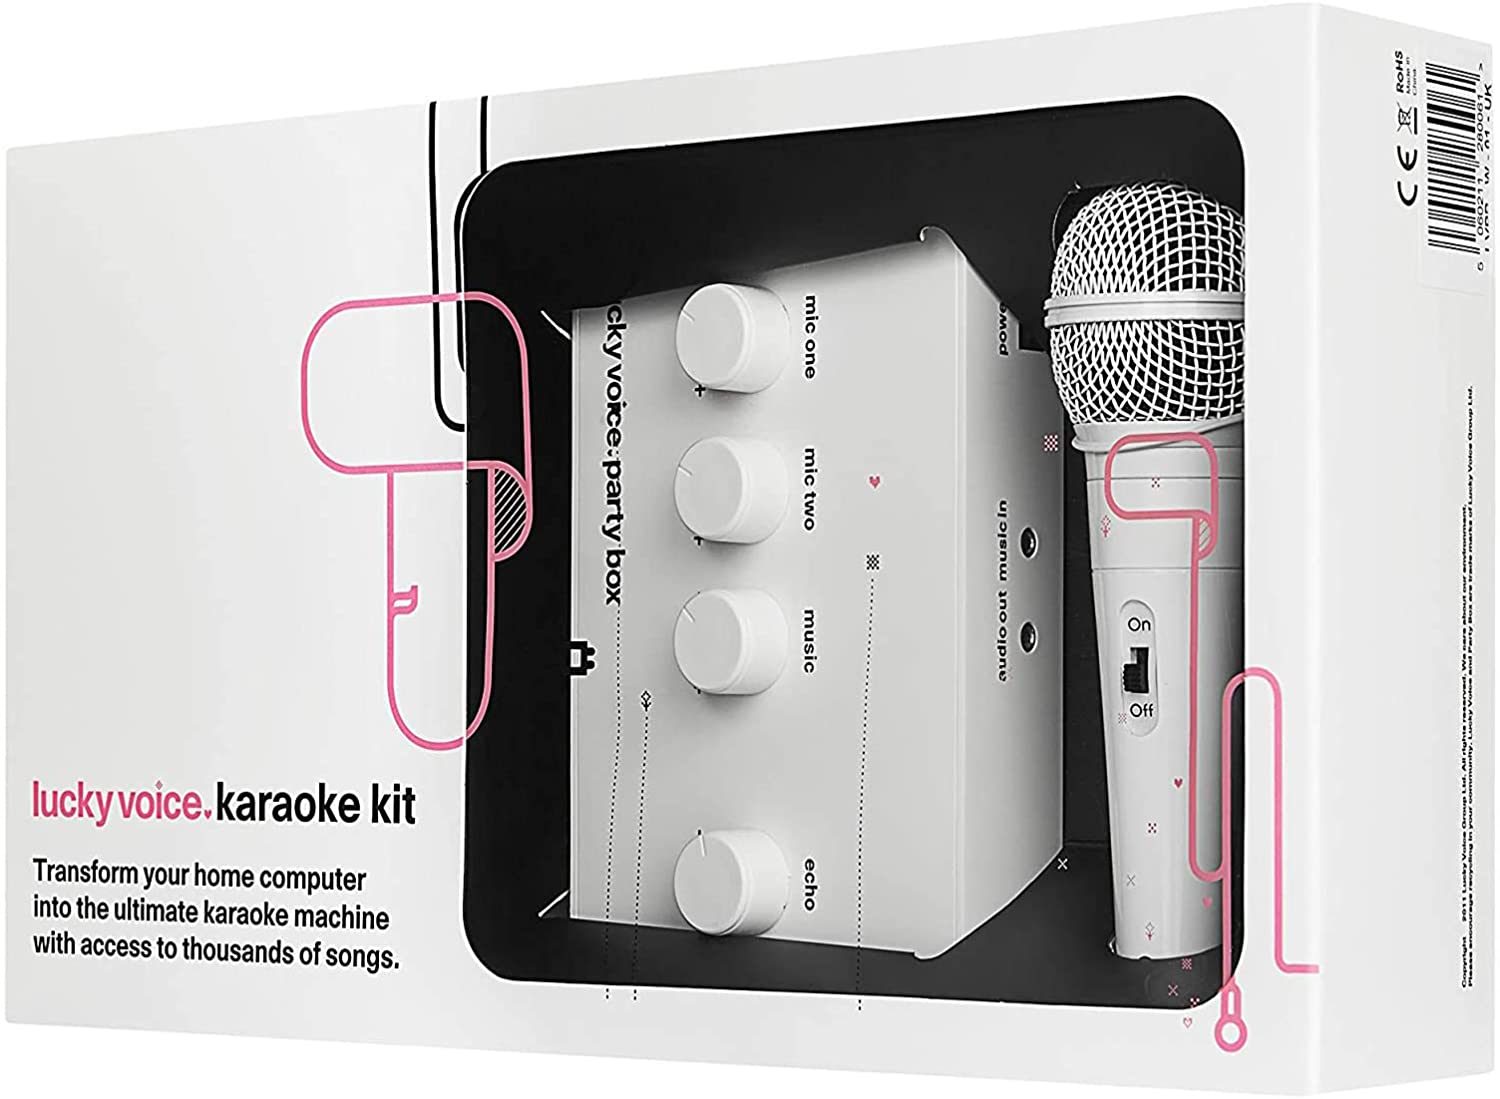 This karaoke kit could provide some great entertainment over the Easter holidays